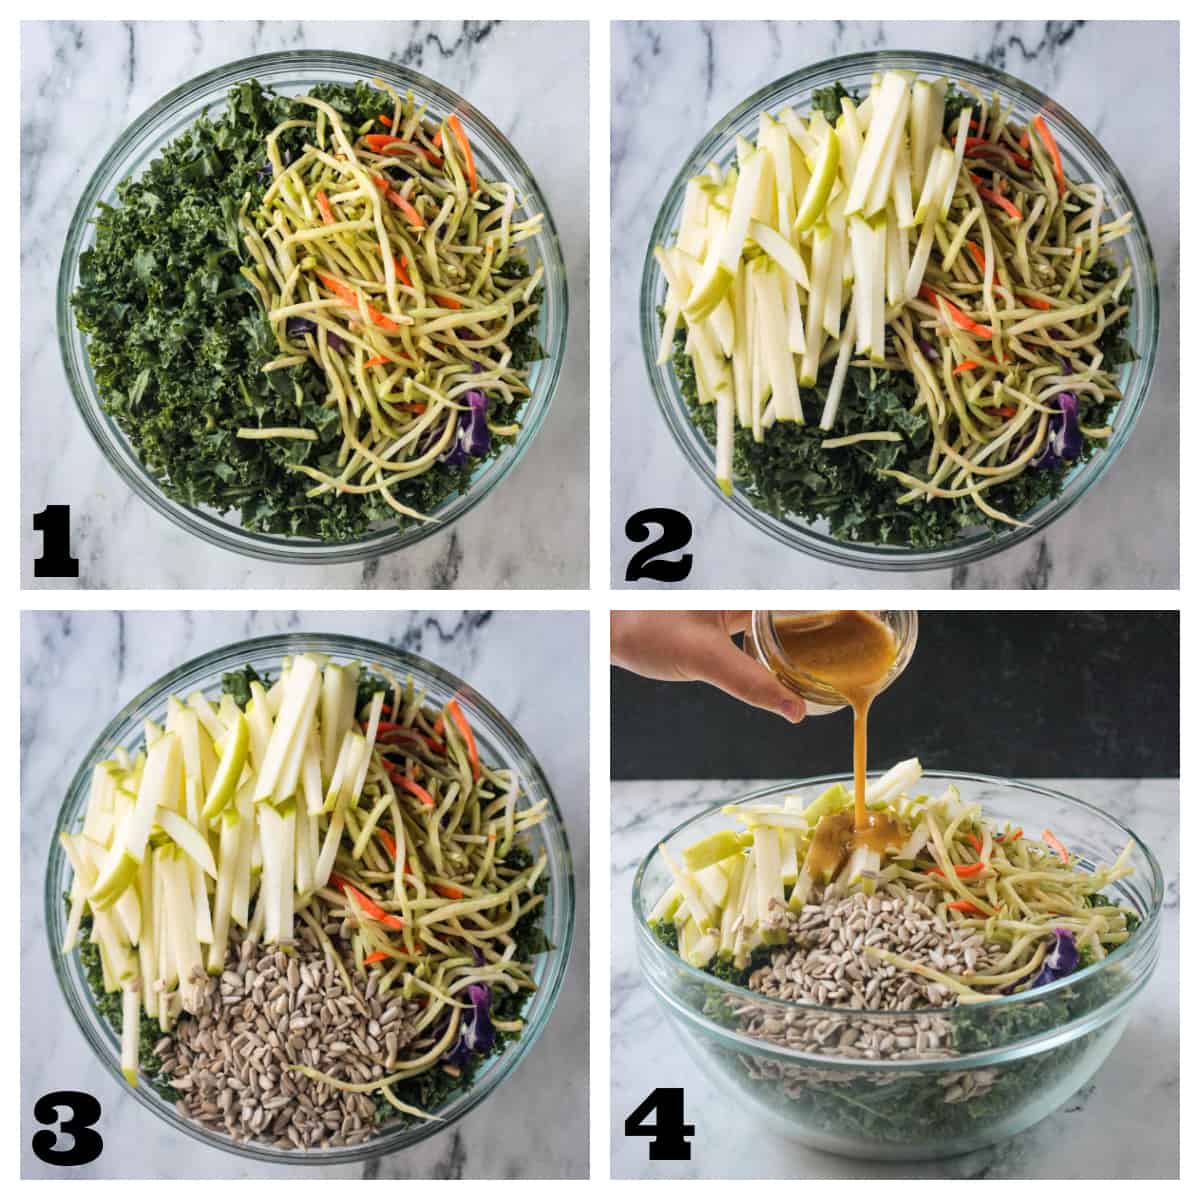 4 photo collage of assembling the salad: kale, broccoli slaw, apples, sunflower seeds, and dressing.